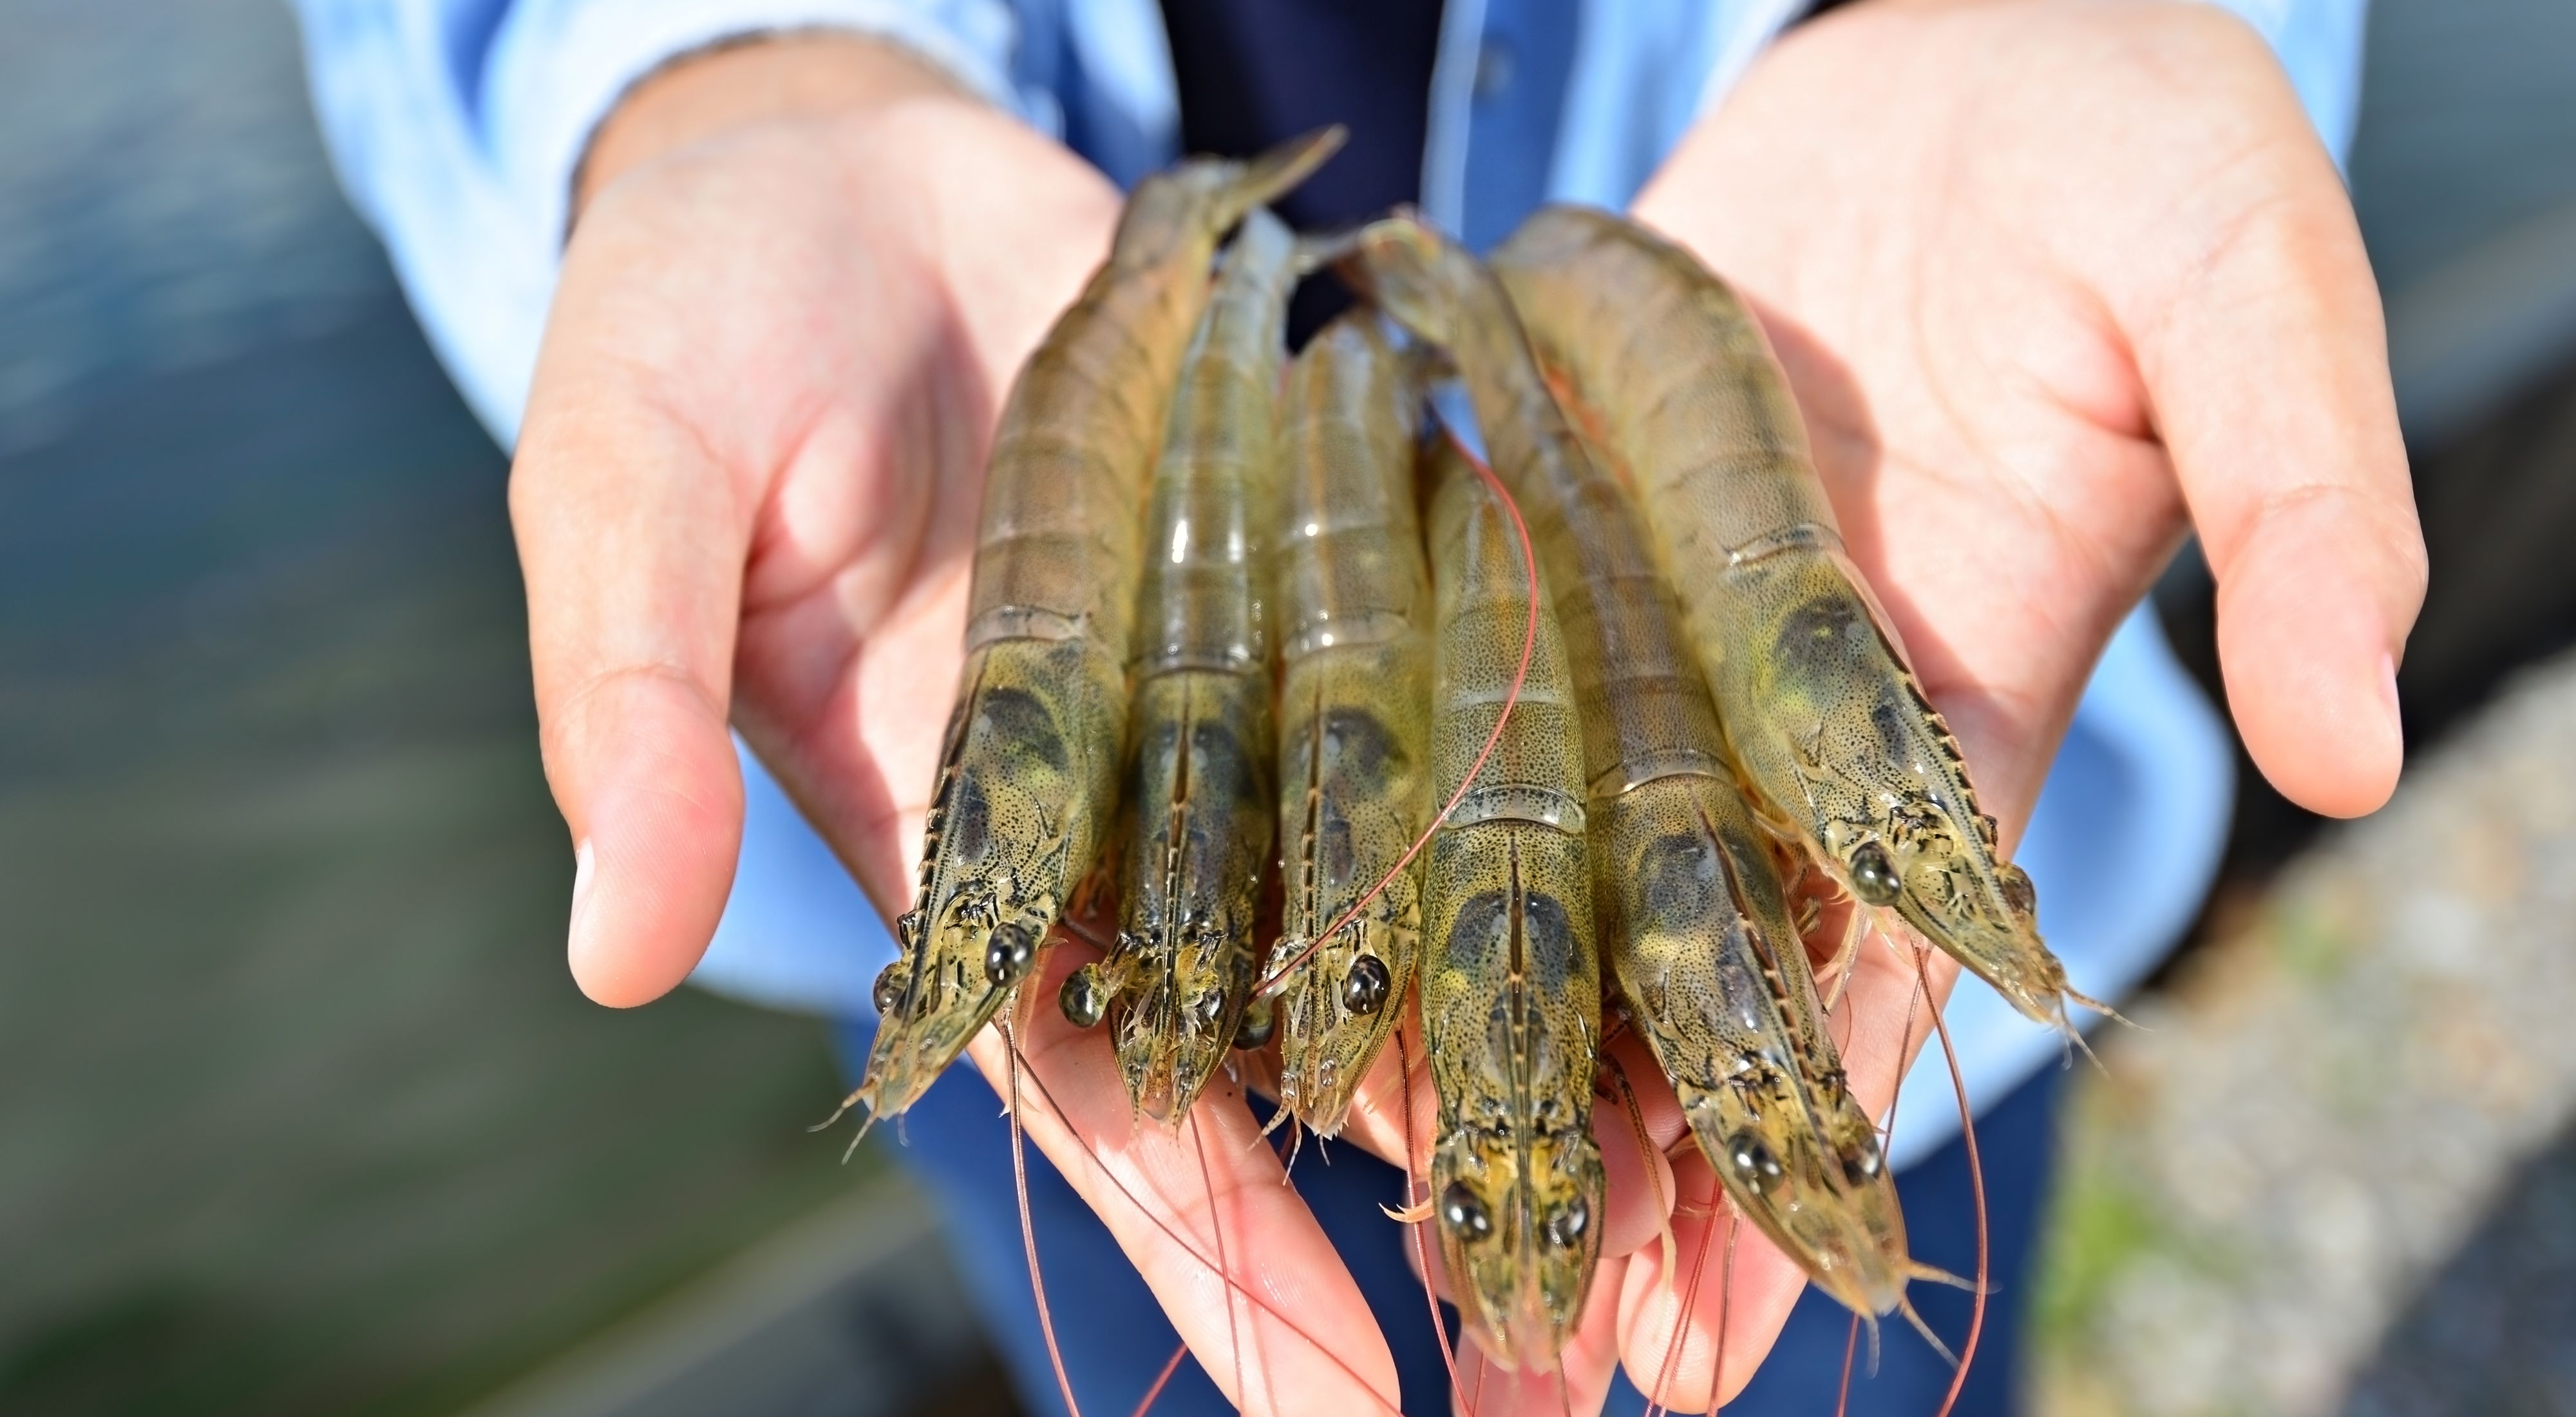 A person holds six recently harvested shrimp in their hands.